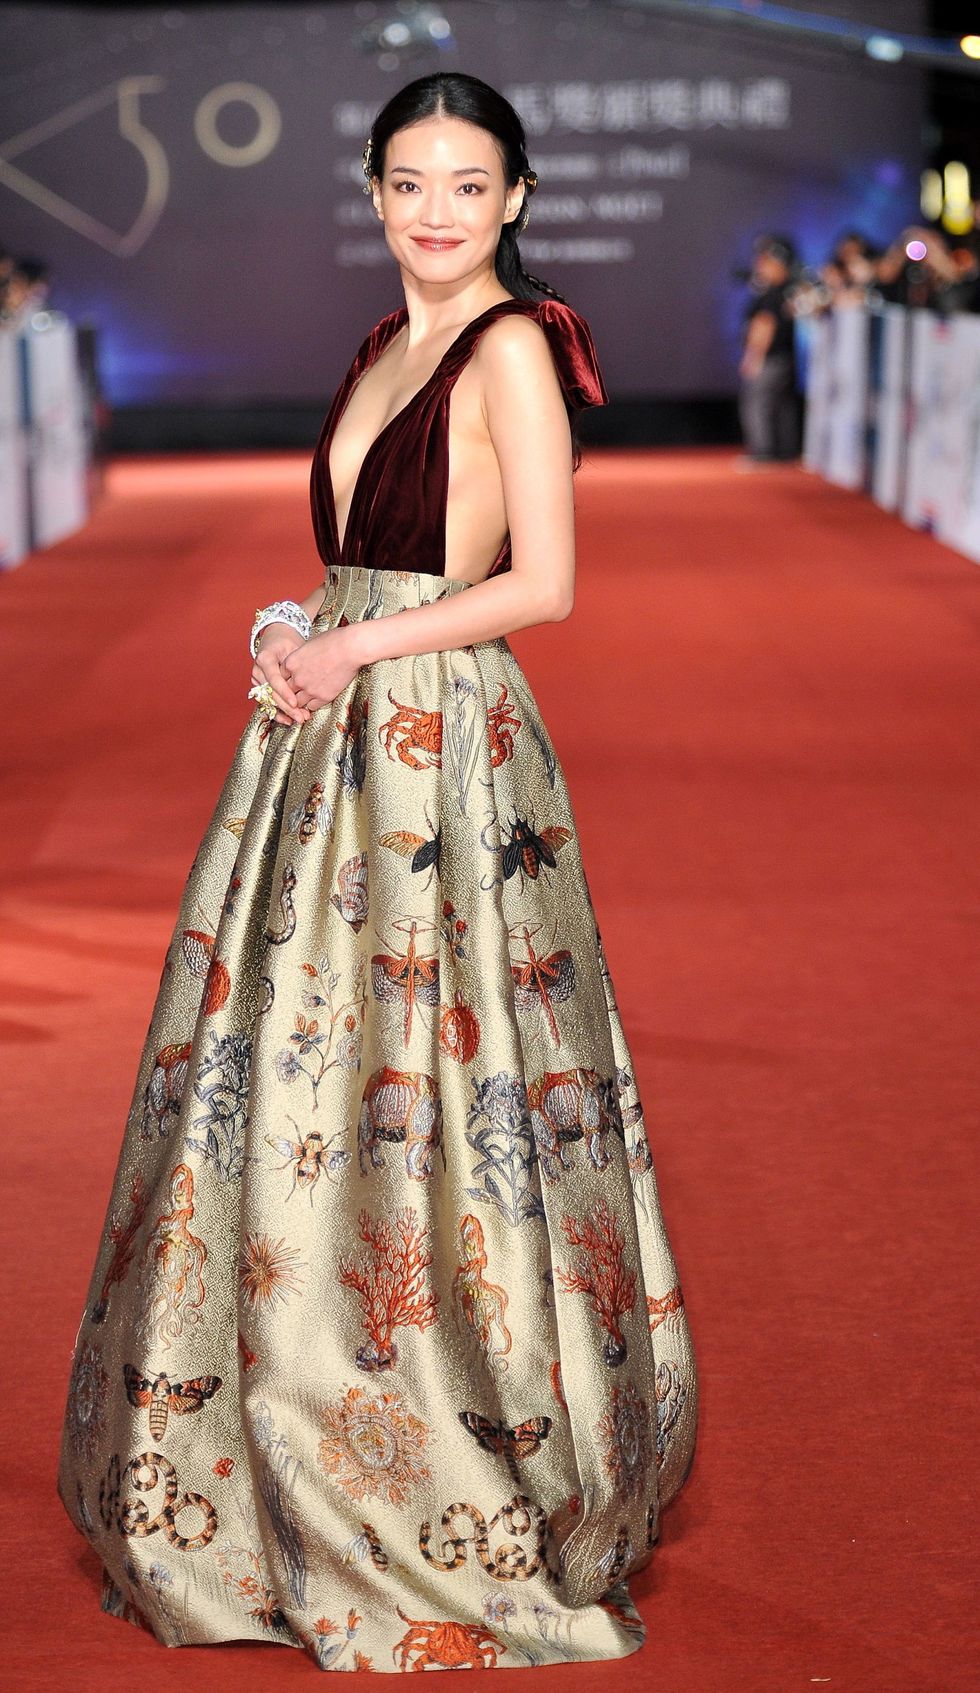 Fashion model, Red carpet, Clothing, Dress, Carpet, Fashion, Flooring, Hairstyle, Beauty, Gown, 